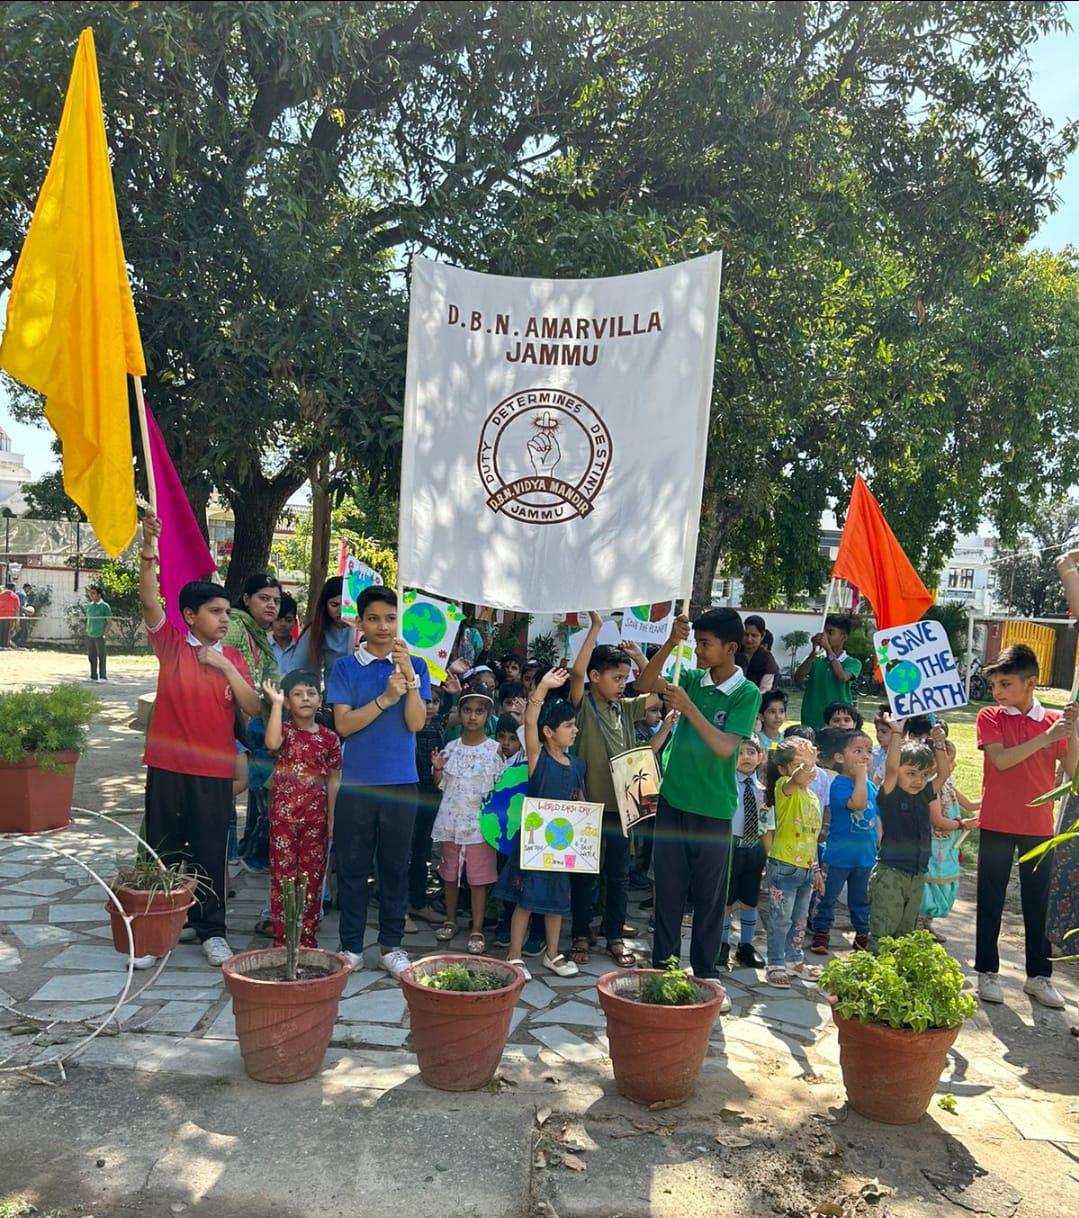 Rally on Earth Day by Kindergarten Students